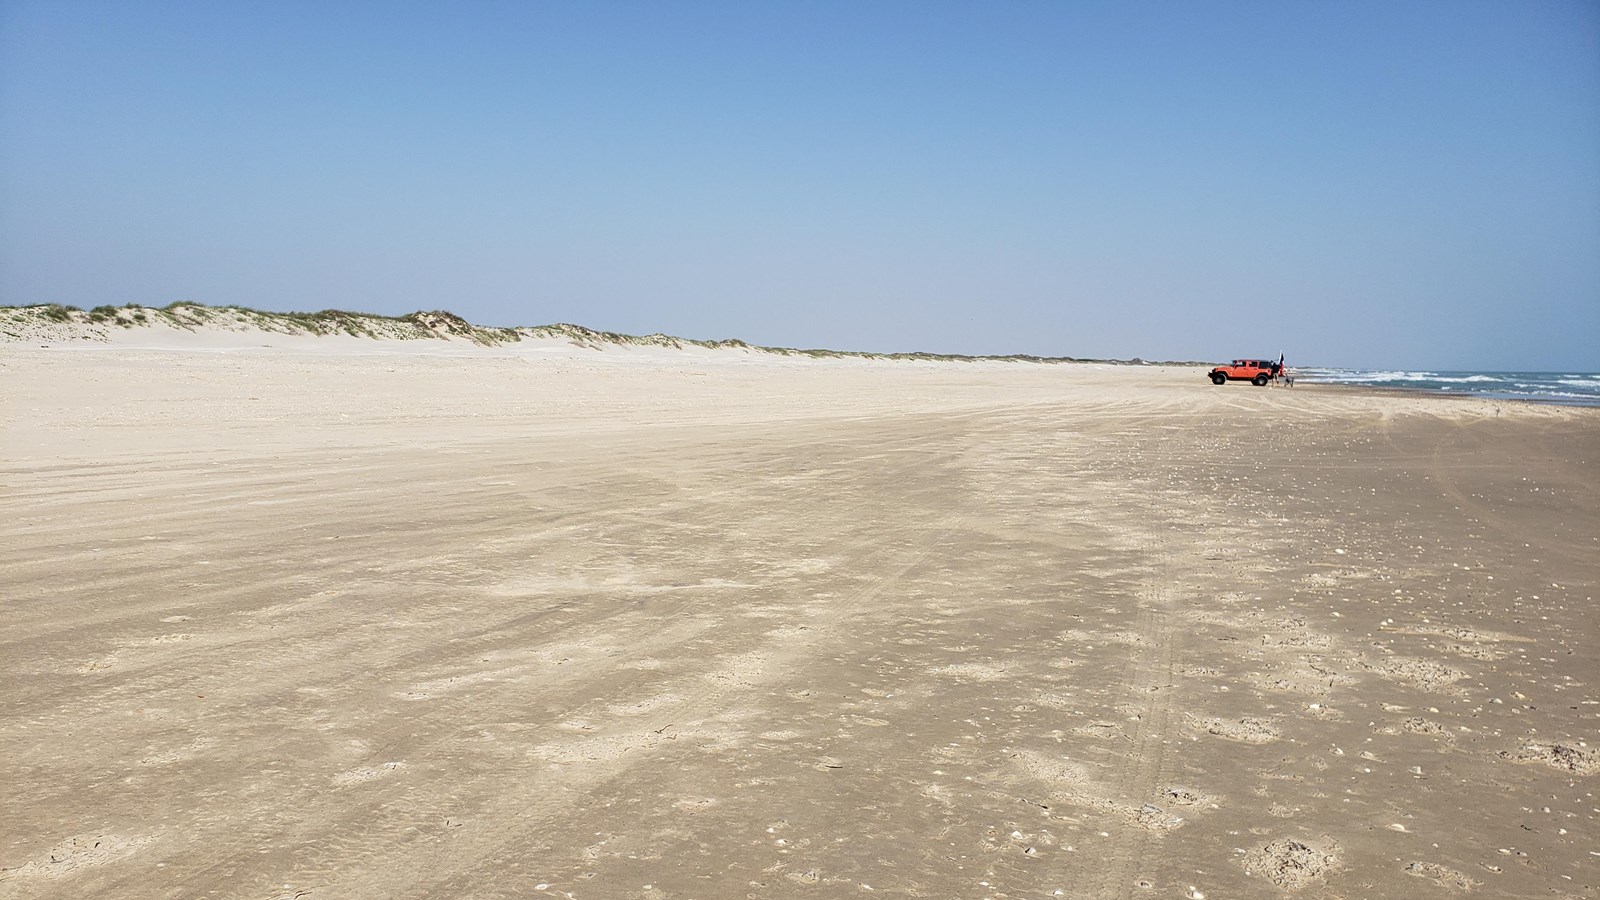 A long sandy beach with a red truck in the distance.